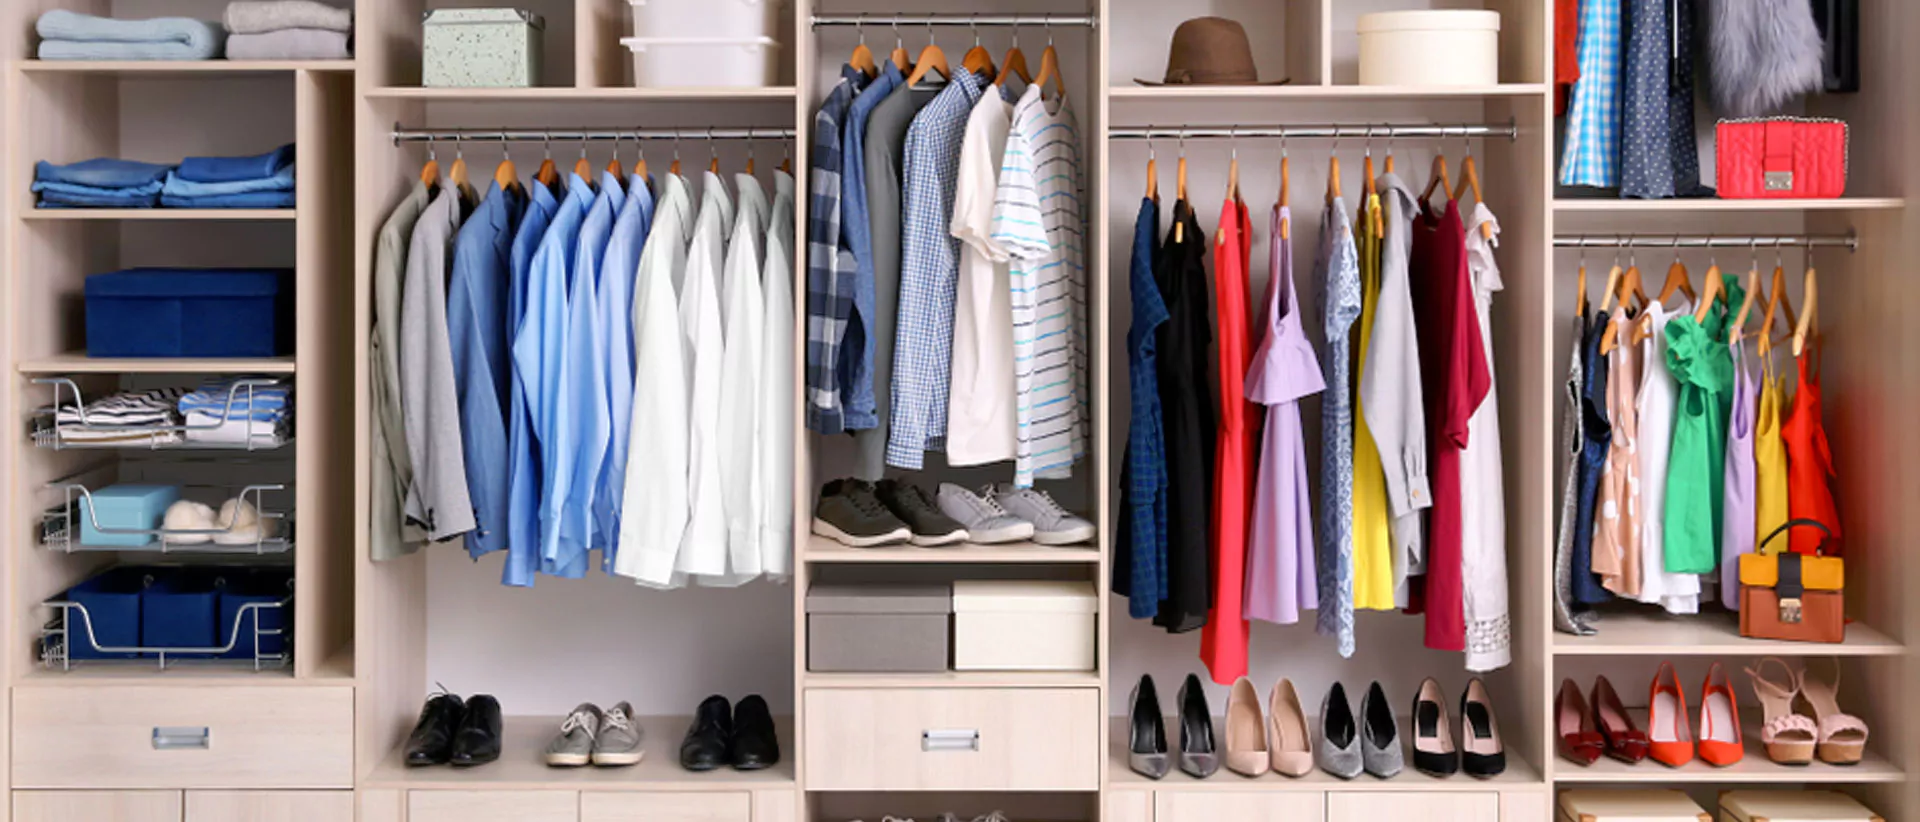 Wardrobe with clothes - Hire stylist for wardrobe makeover.
